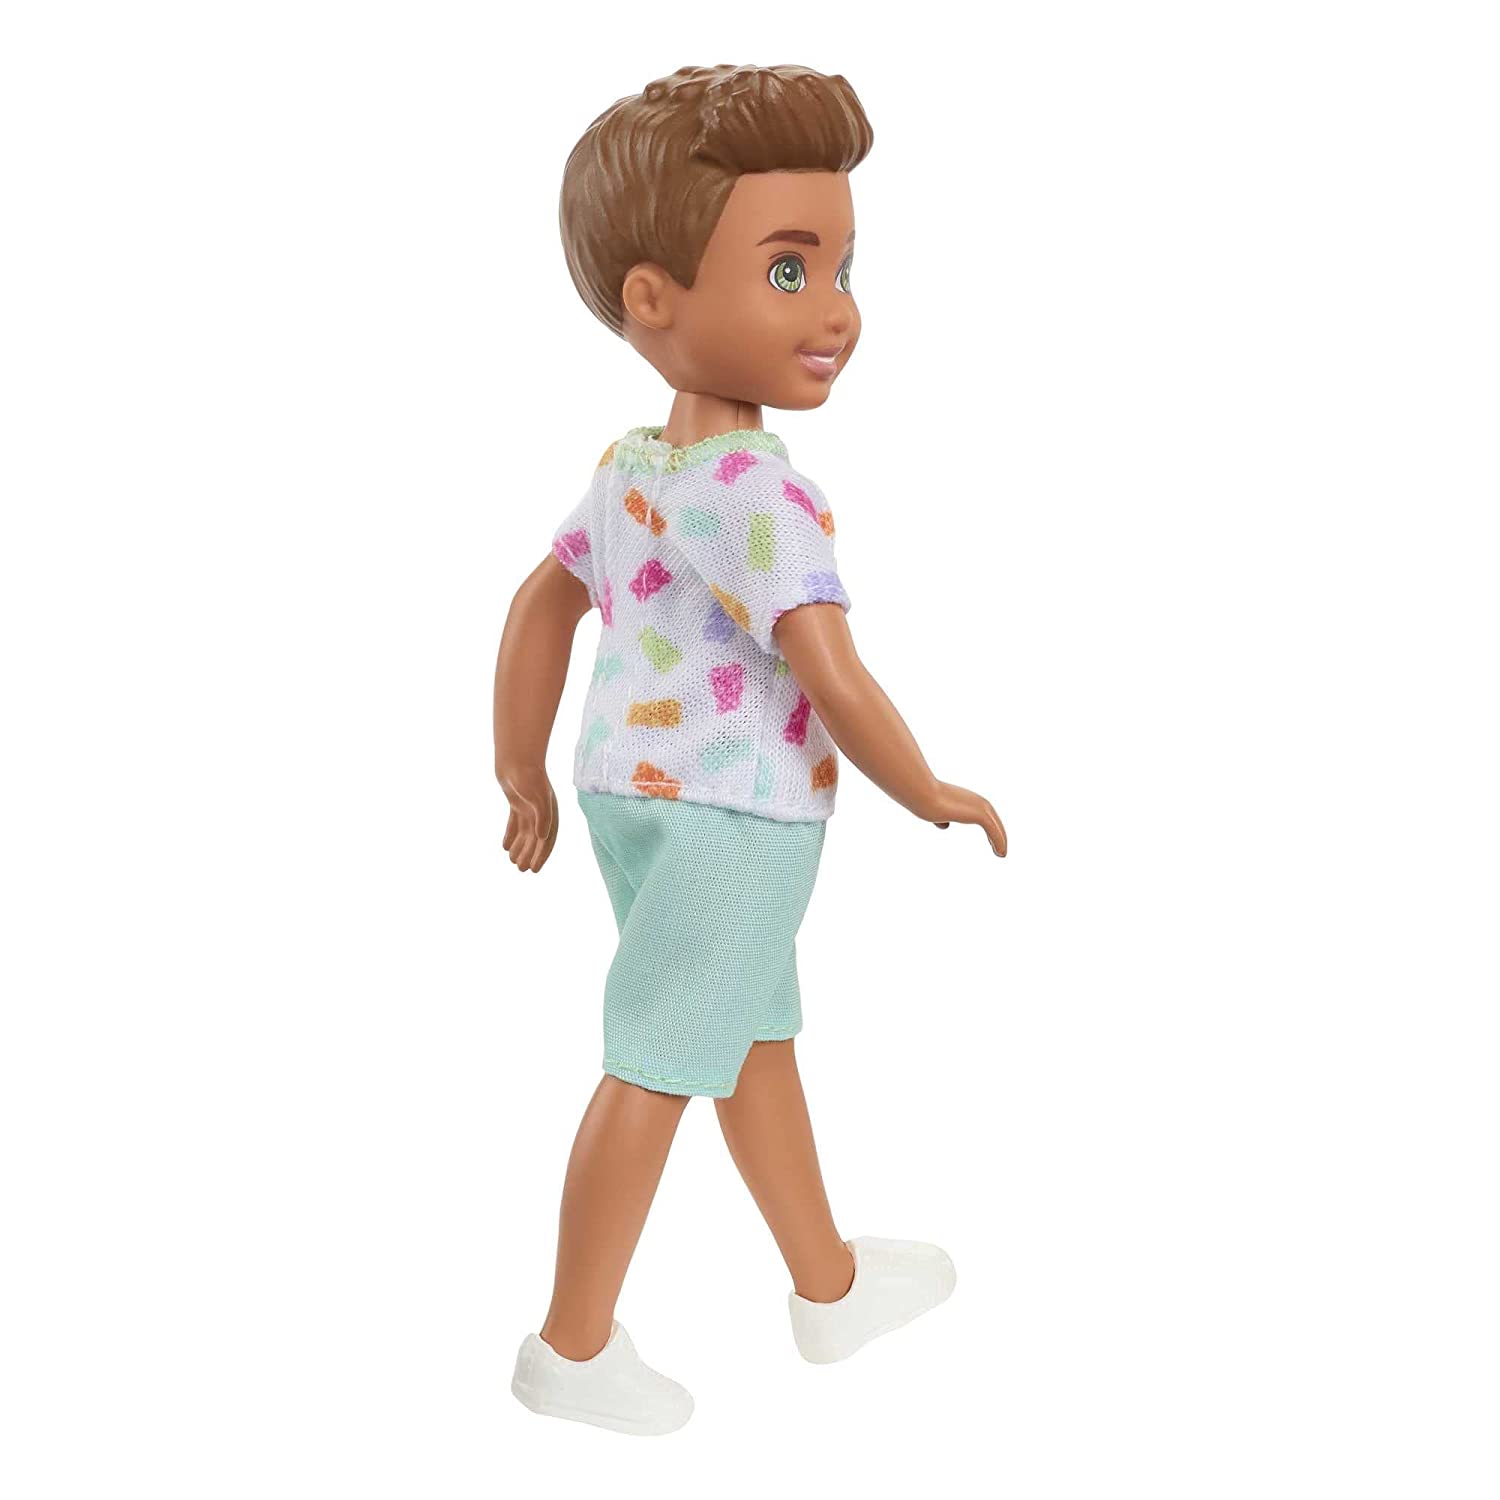 Barbie Chelsea 6 Inch Brunette Boy Doll Wearing Colorful Printed T-Shirt, Blue Shorts & White Shoes for Kids Ages 3 Years Old & Up